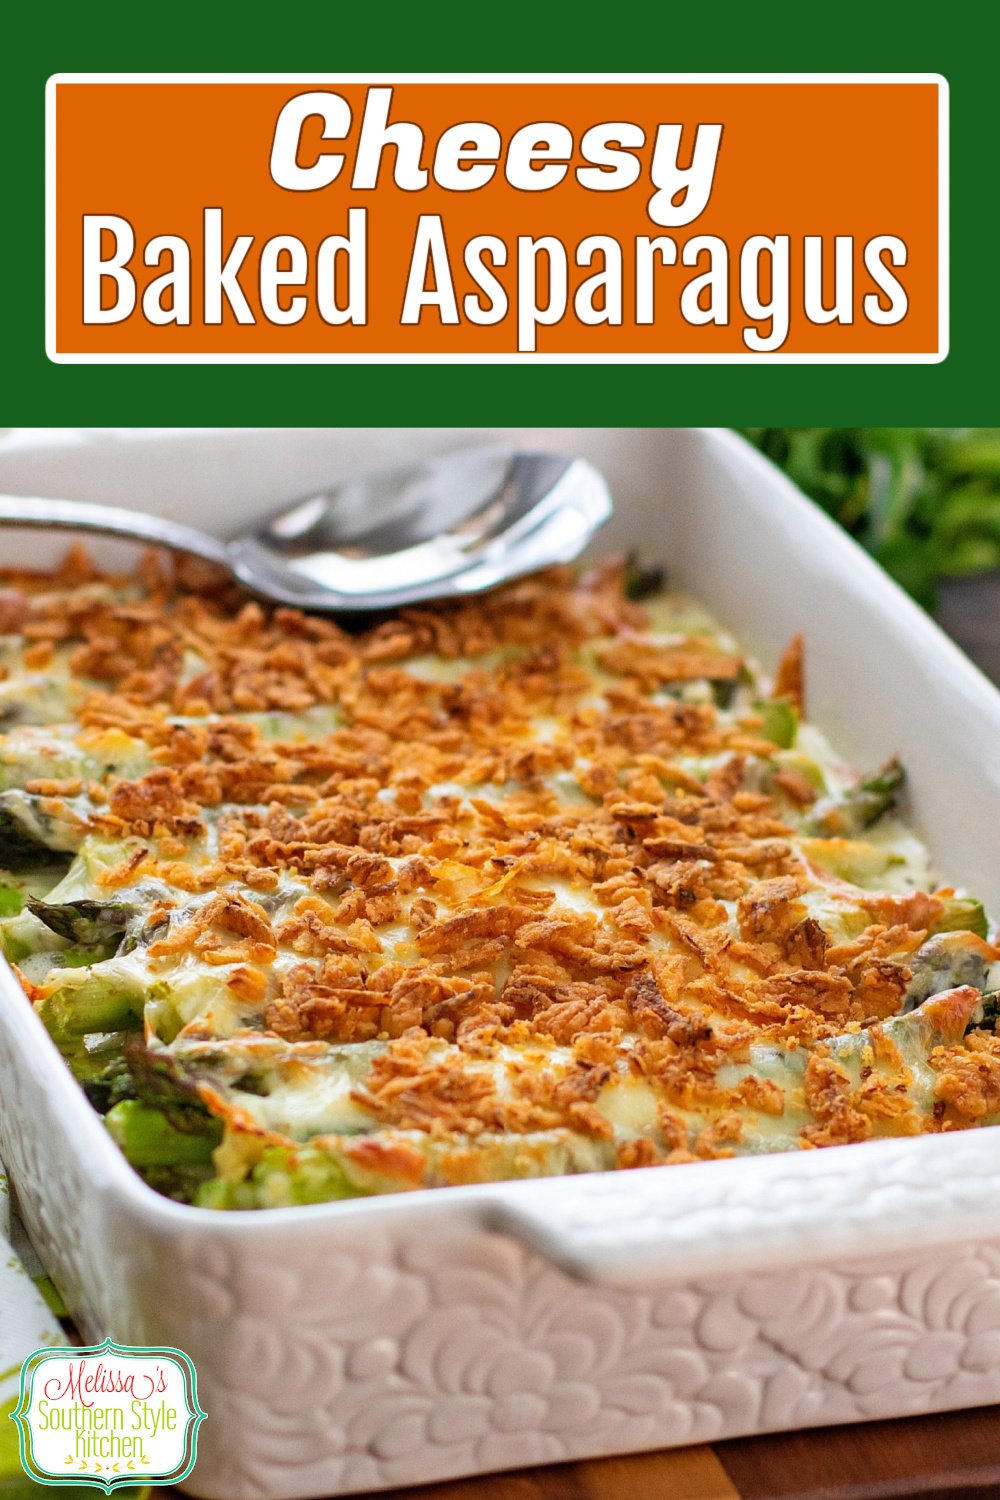 This oven roasted Cheesy Baked Asparagus is a decadent side dish that will elevate your side dish options #cheesybakedasparagus #asapragusrecipes #roastedasparagus #freshasparagusrecipes #southernrecipes via @melissasssk